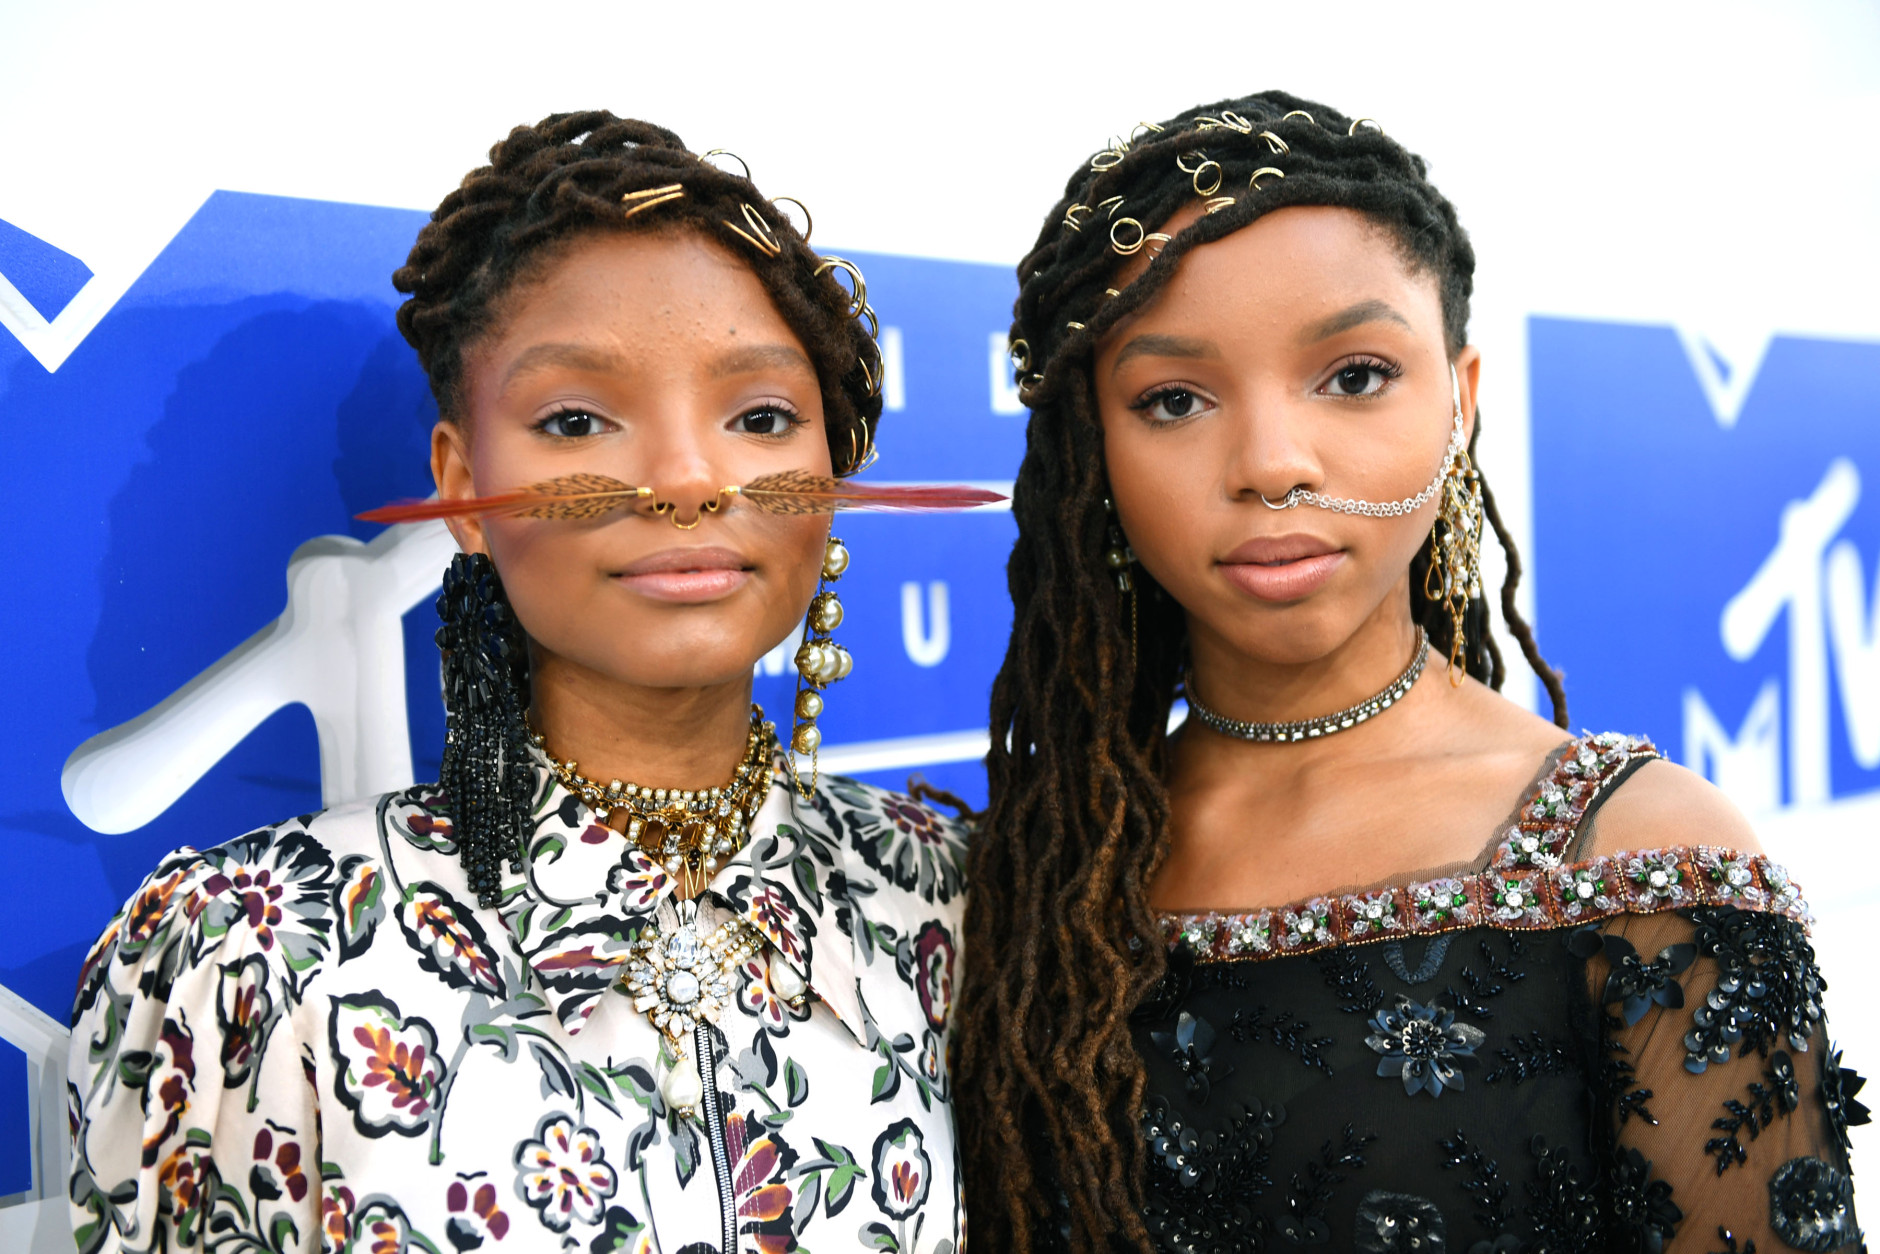 NEW YORK, NY - AUGUST 28:  Chloe Bailey (L) and Halle Bailey attend the 2016 MTV Video Music Awards at Madison Square Garden on August 28, 2016 in New York City.  (Photo by Larry Busacca/Getty Images for MTV)